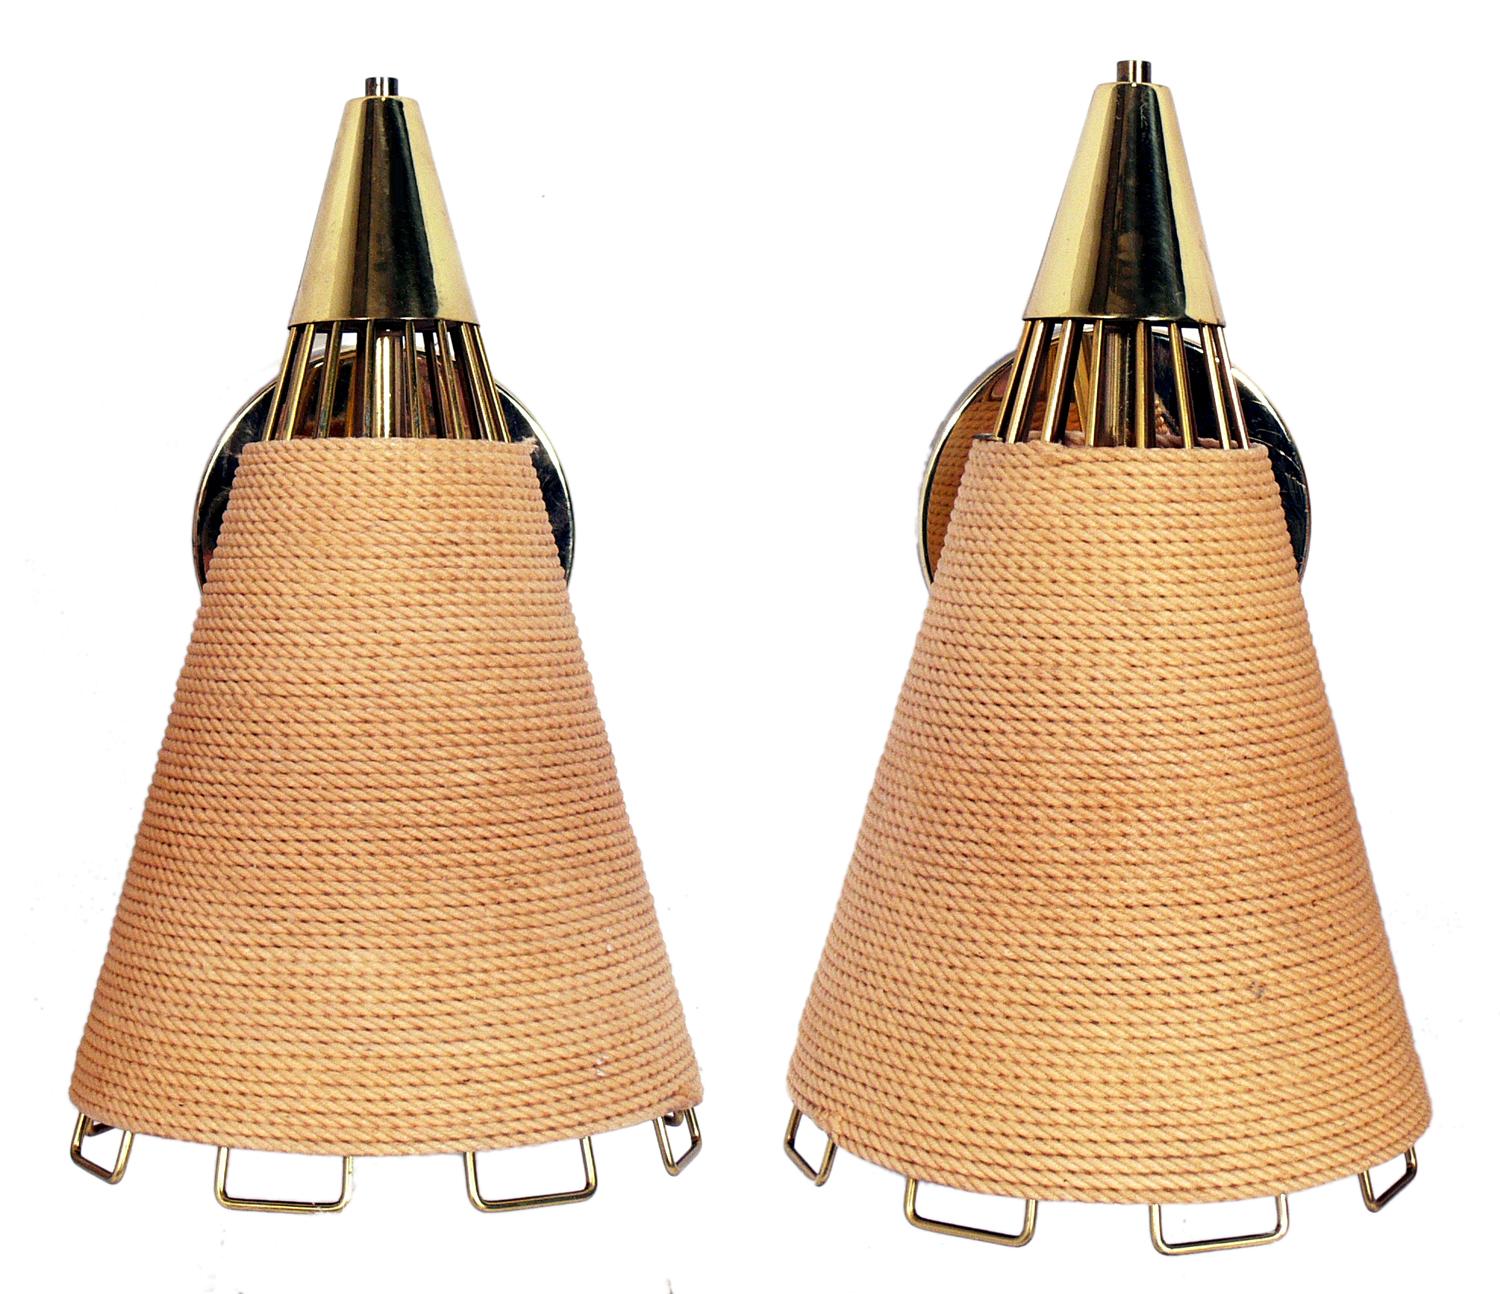 Rope and brass sconces, American, circa 1950s. 
The rope wrapped shades give them a great natural texture and nautical feel. Brass-plated metal retains warm natural patina. Rewired.